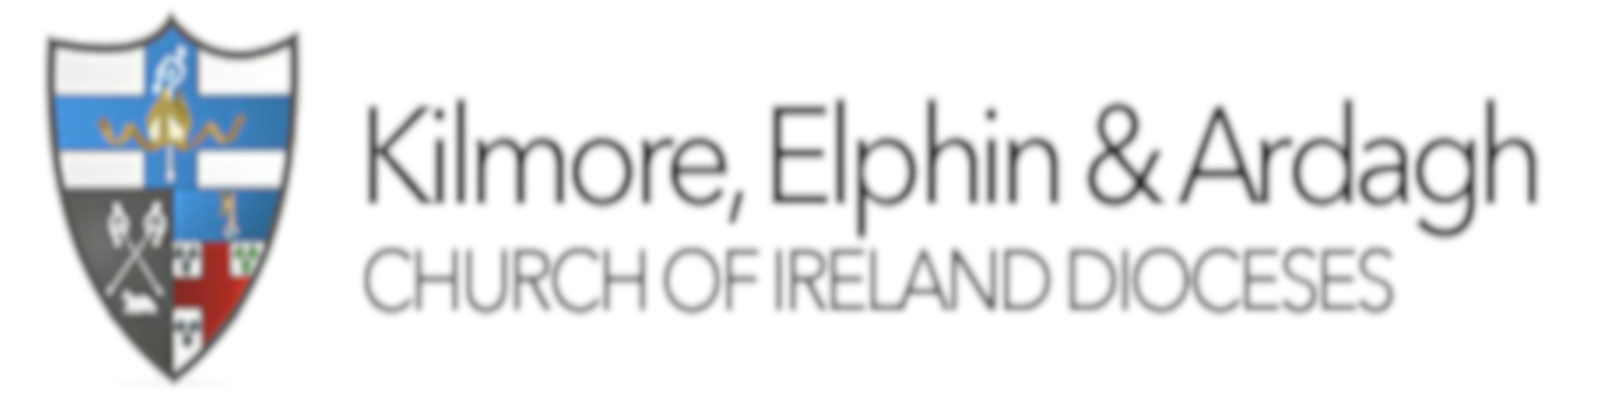 The Diocese of Kilmore, Elphin and Ardagh